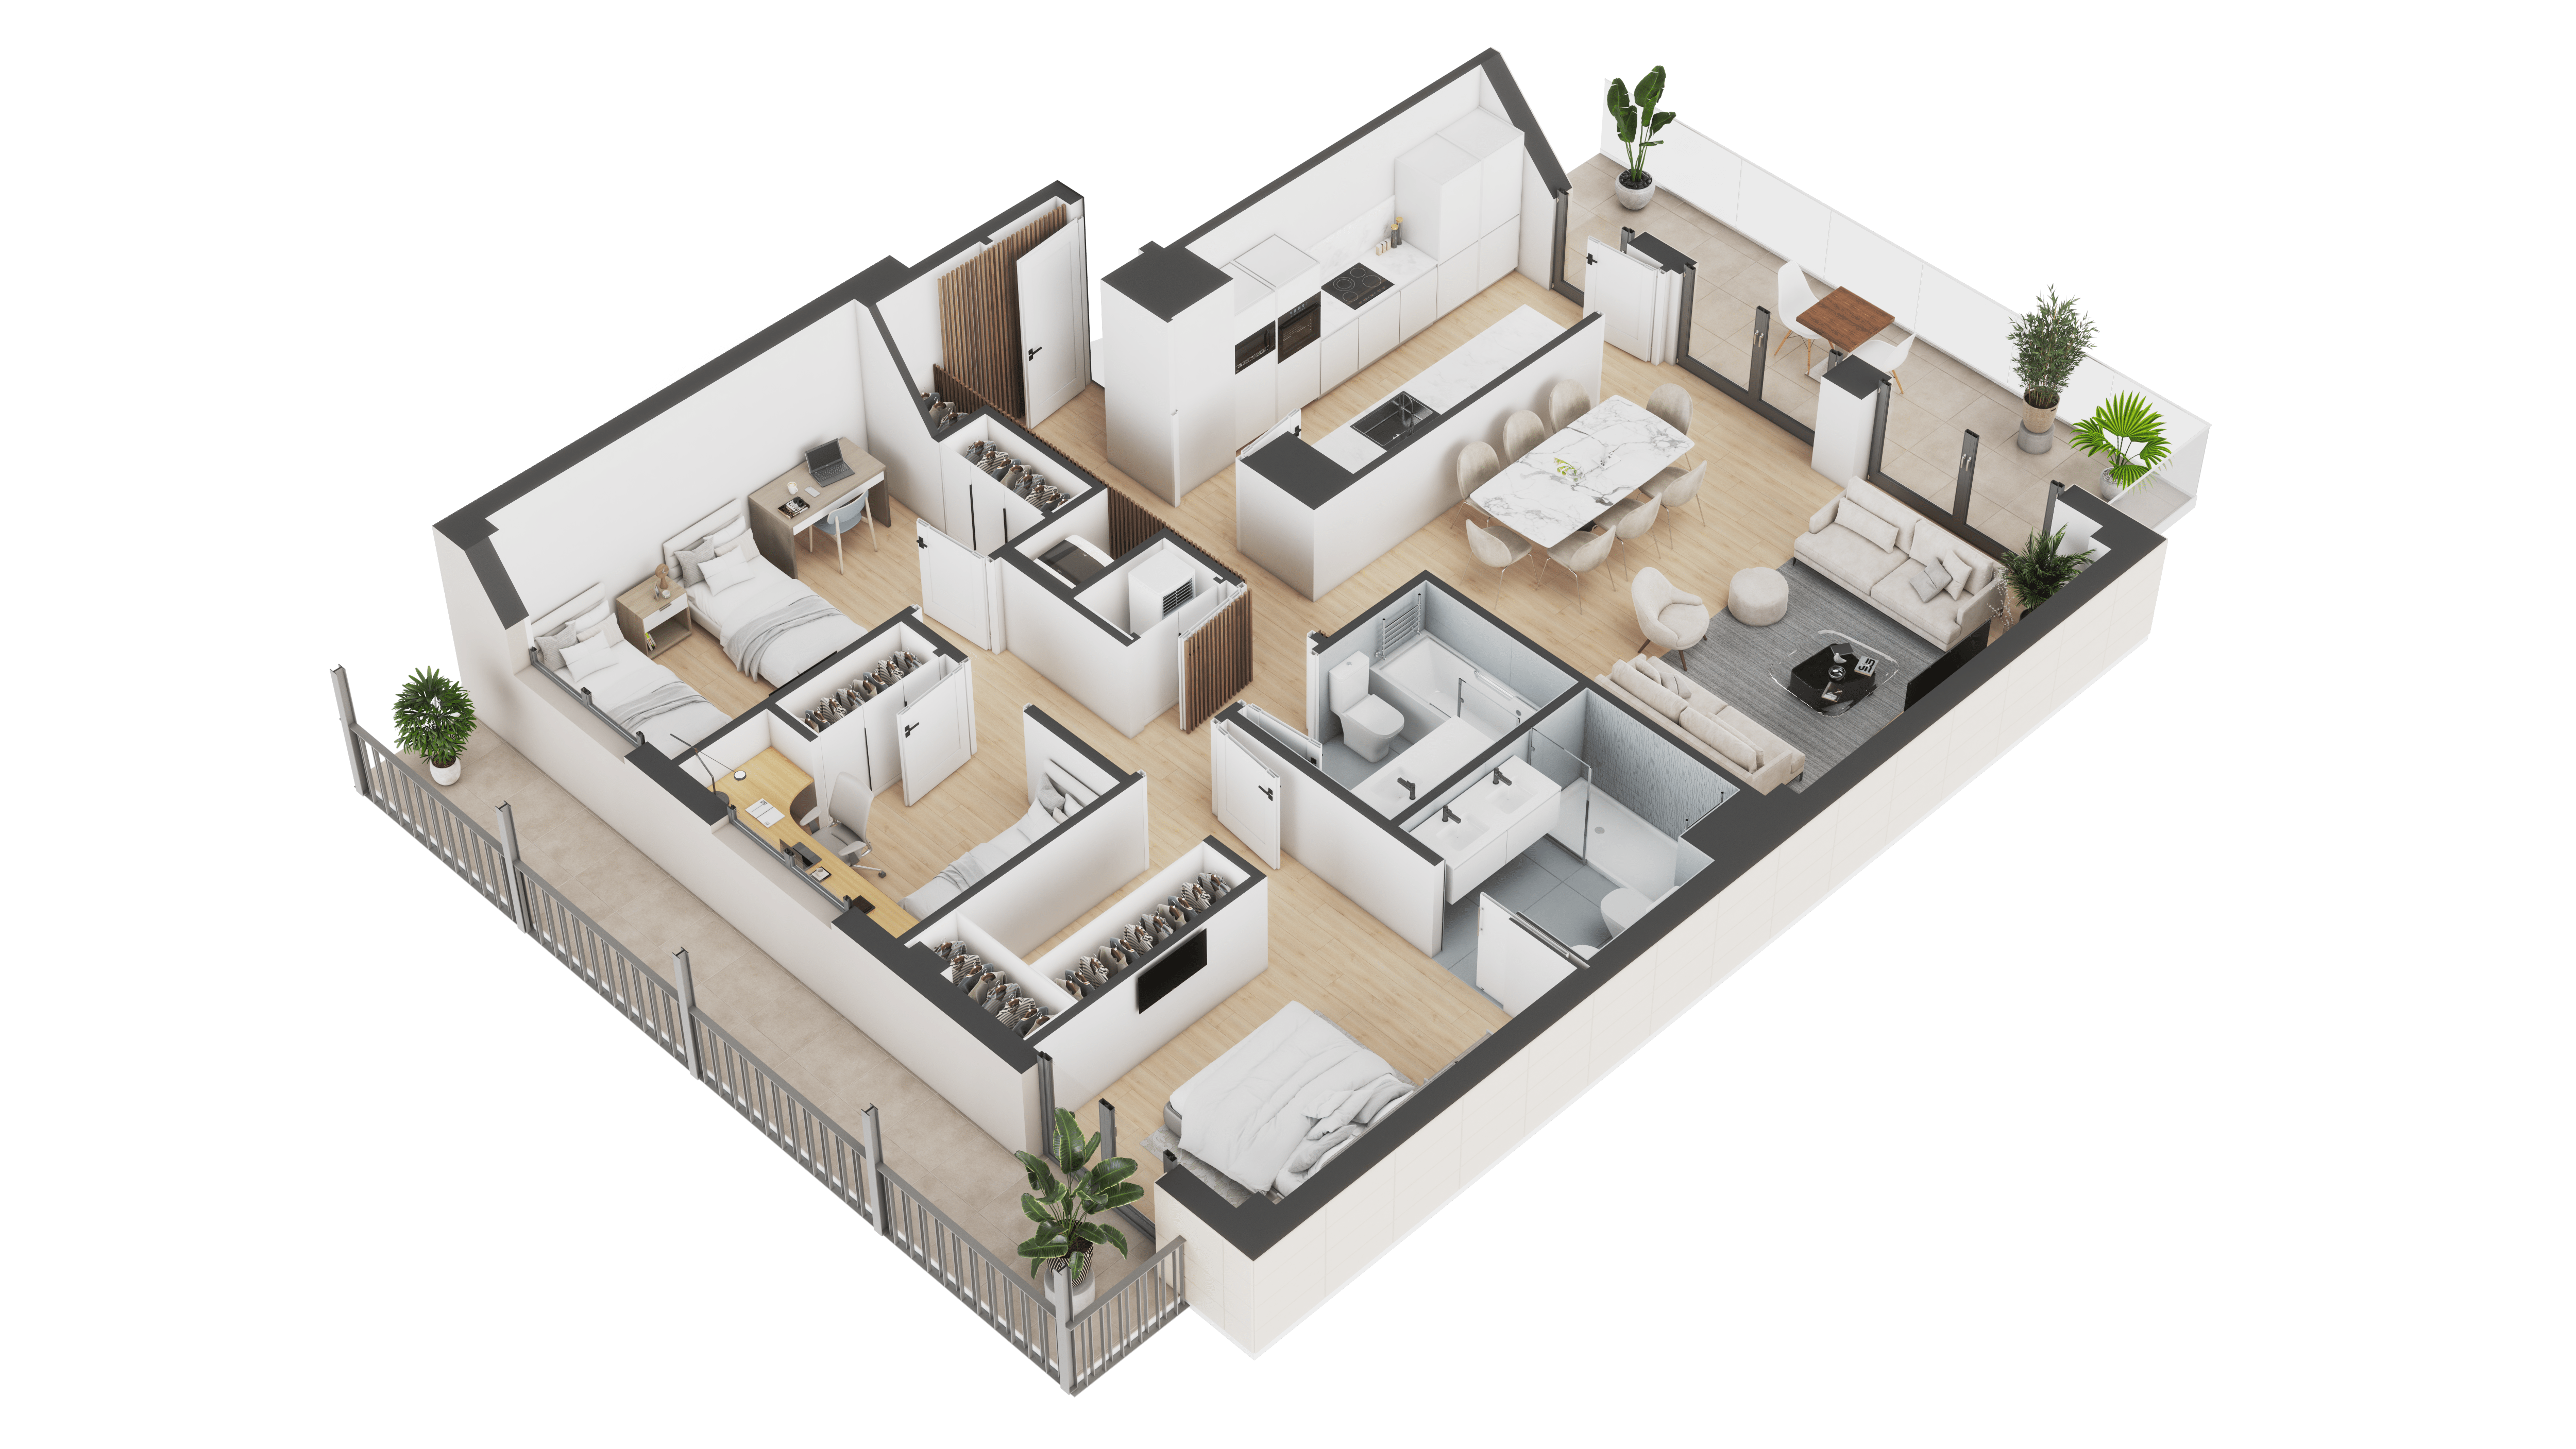 3d model render of house first floor with 3 bedrooms using 3dsm, corona, vray delivered in 72 hours using high performance rendering platform for architecture